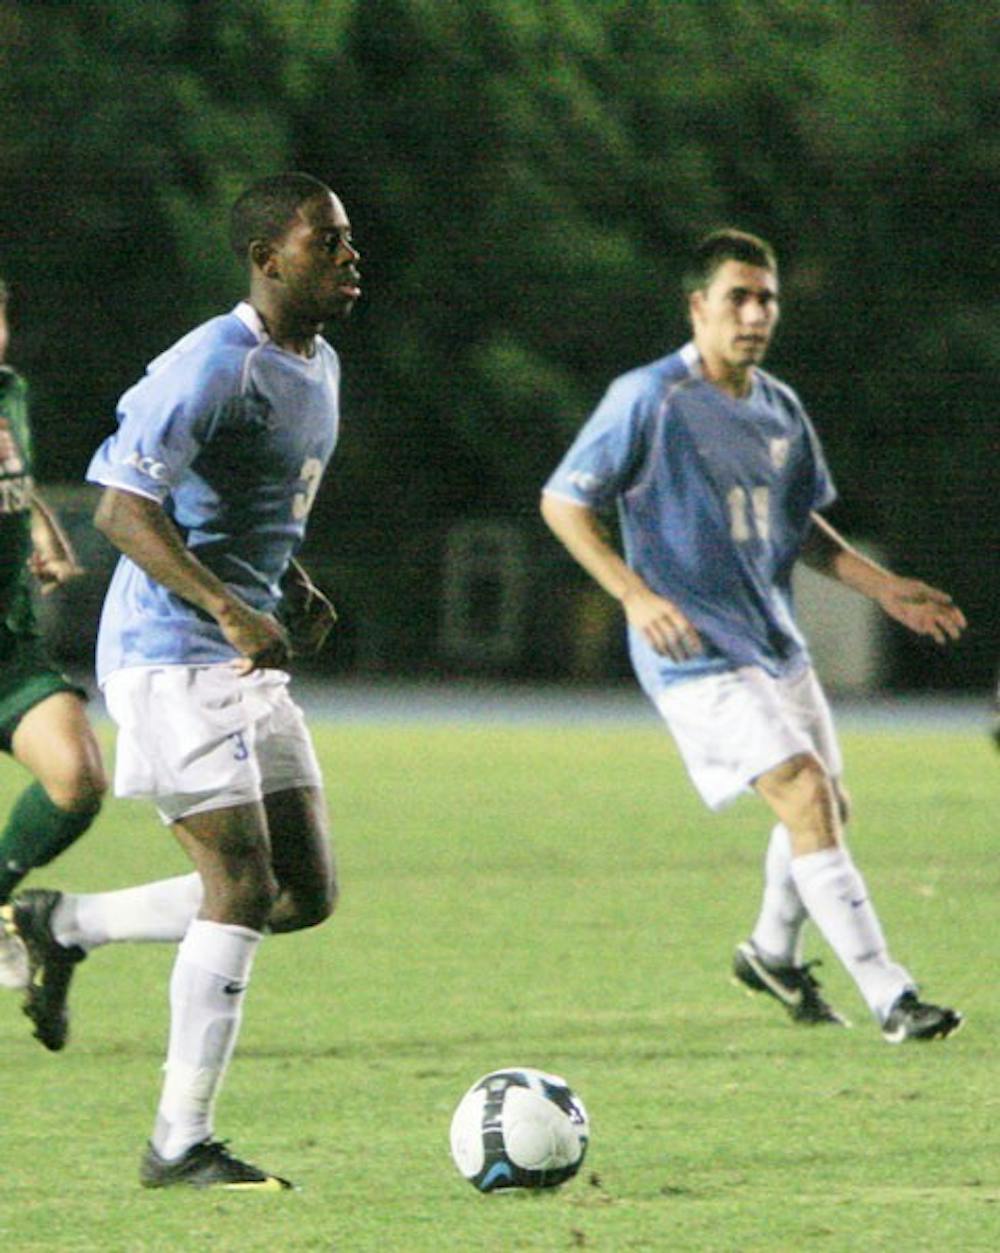 Sophomore forward Alex Dixon (3) scored three goals in the span of 7 minutes to propel the Tar Heels to a 7-0 romp of Stetson.